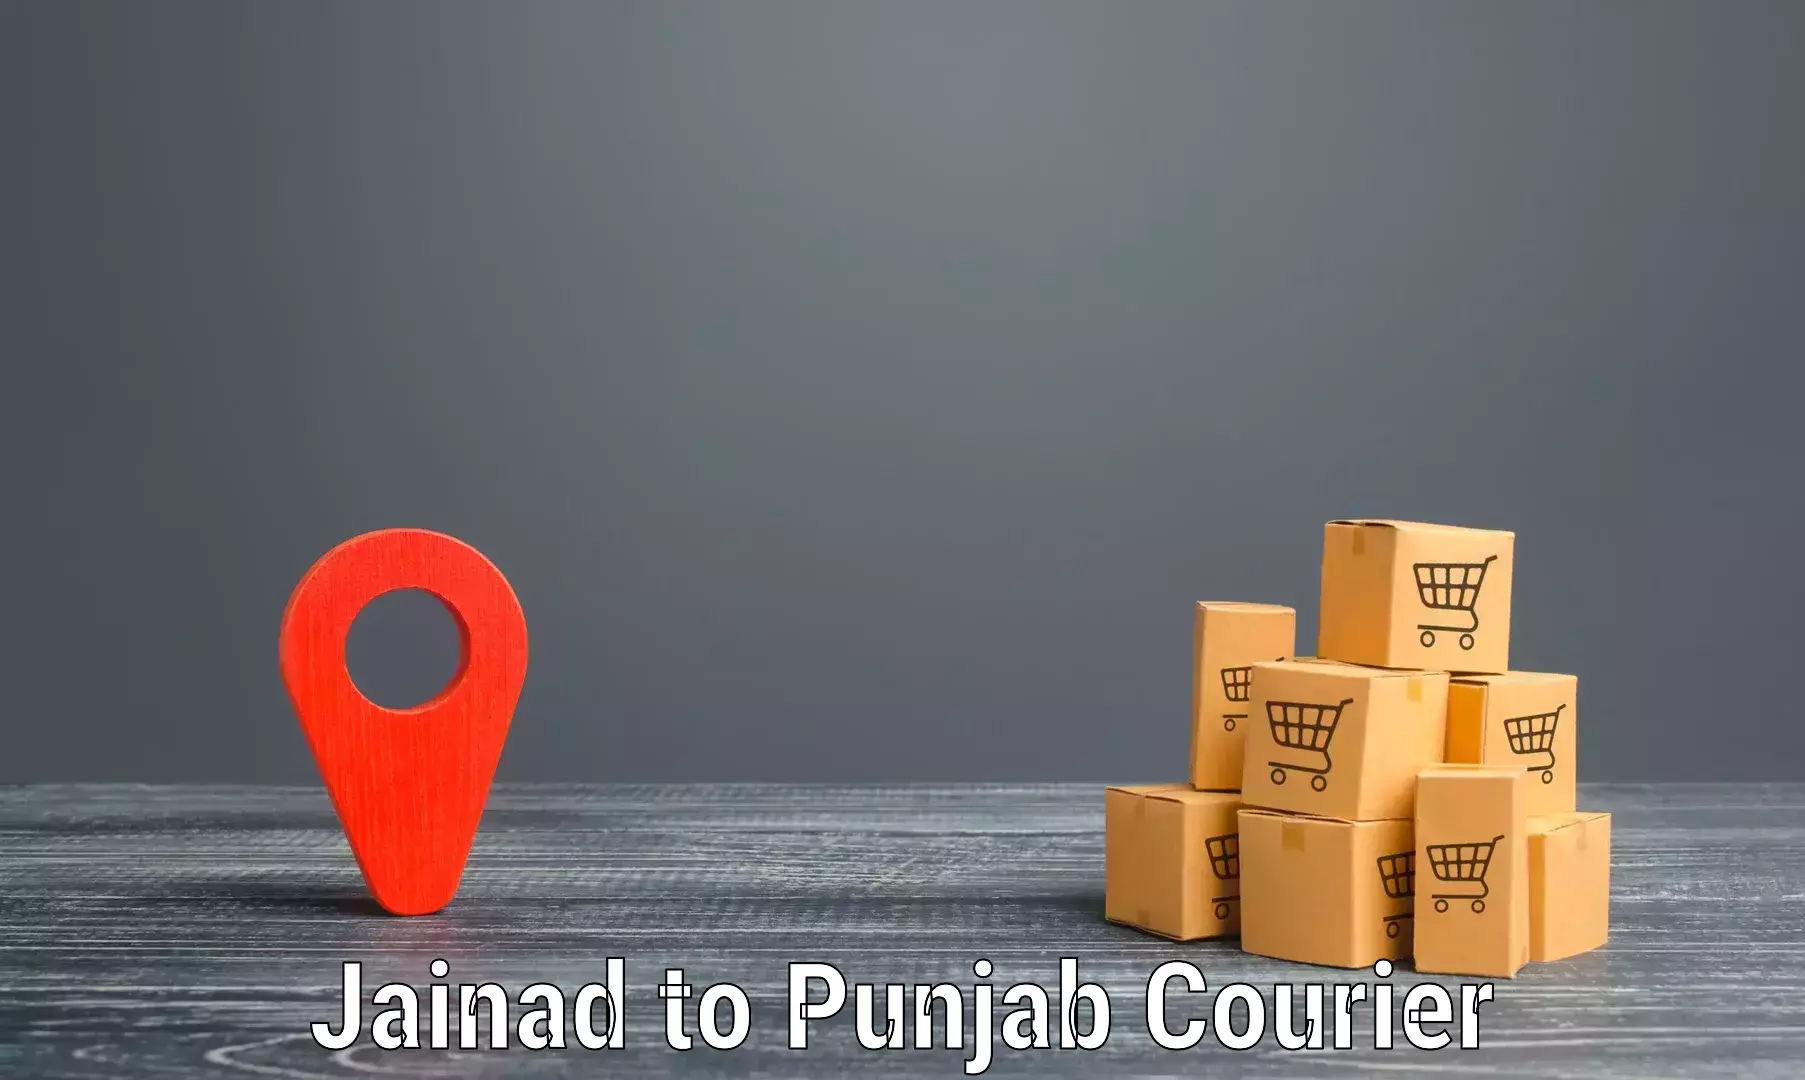 End-to-end delivery Jainad to Pathankot